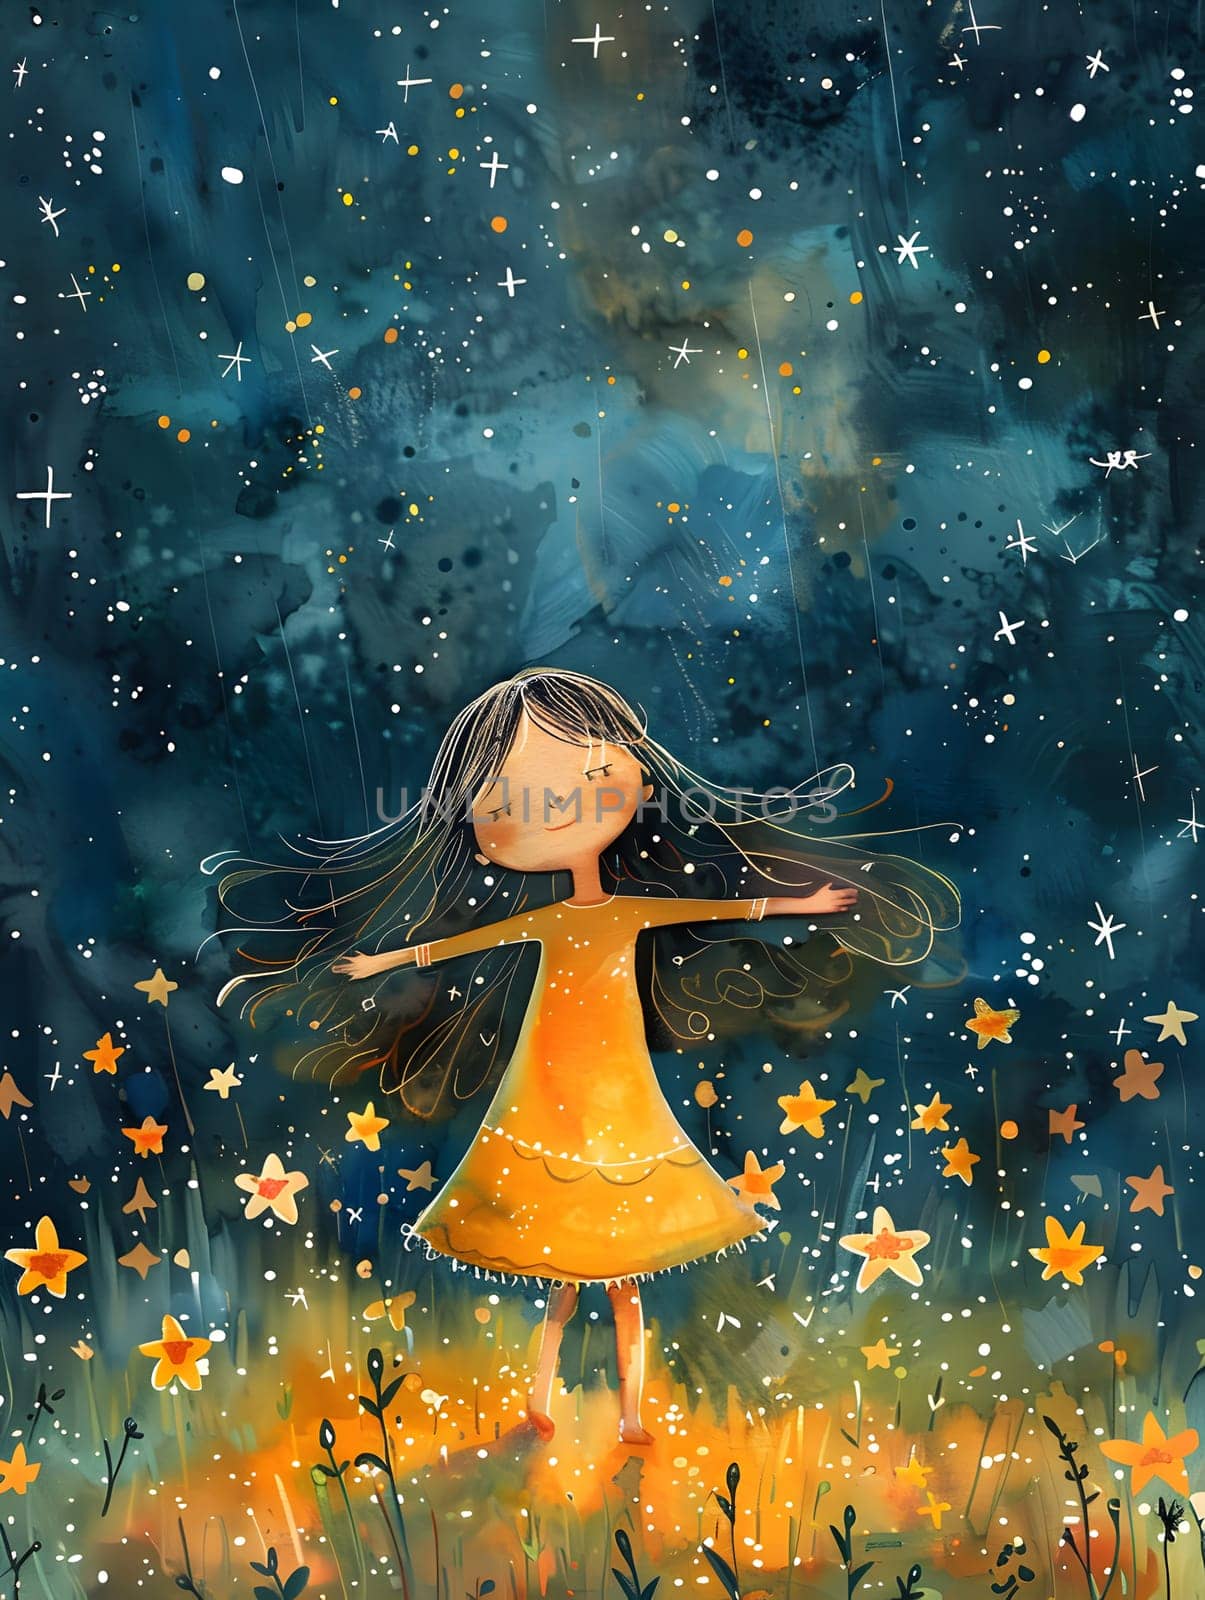 a little girl in a yellow dress is standing in a field of stars by Nadtochiy